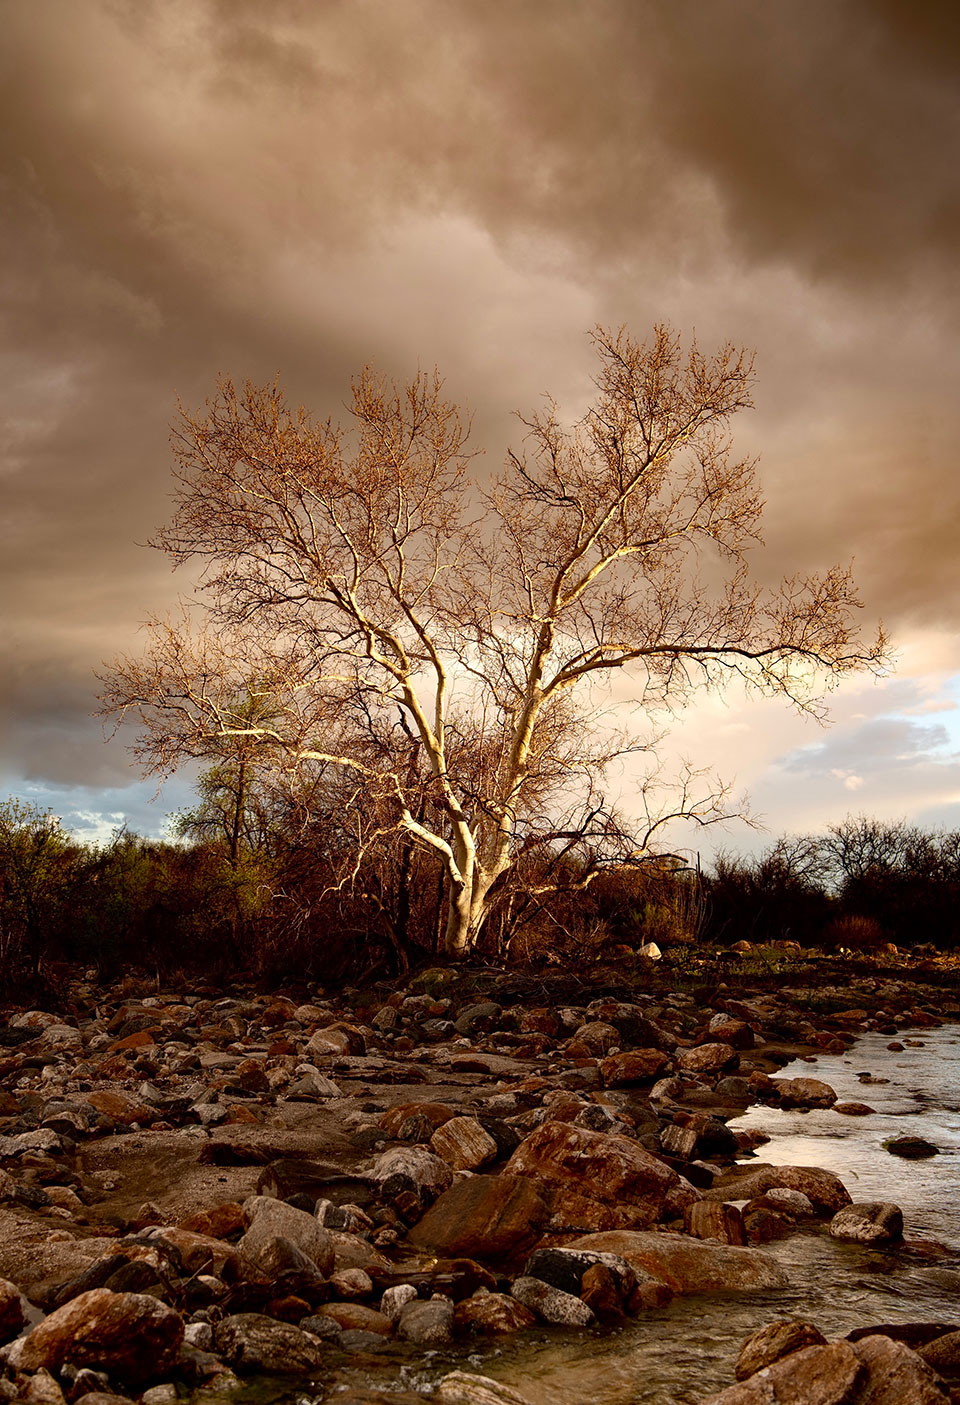 Large barren tree on a rocky riverbank with stormy sky. Photo by Arianna DuPont.